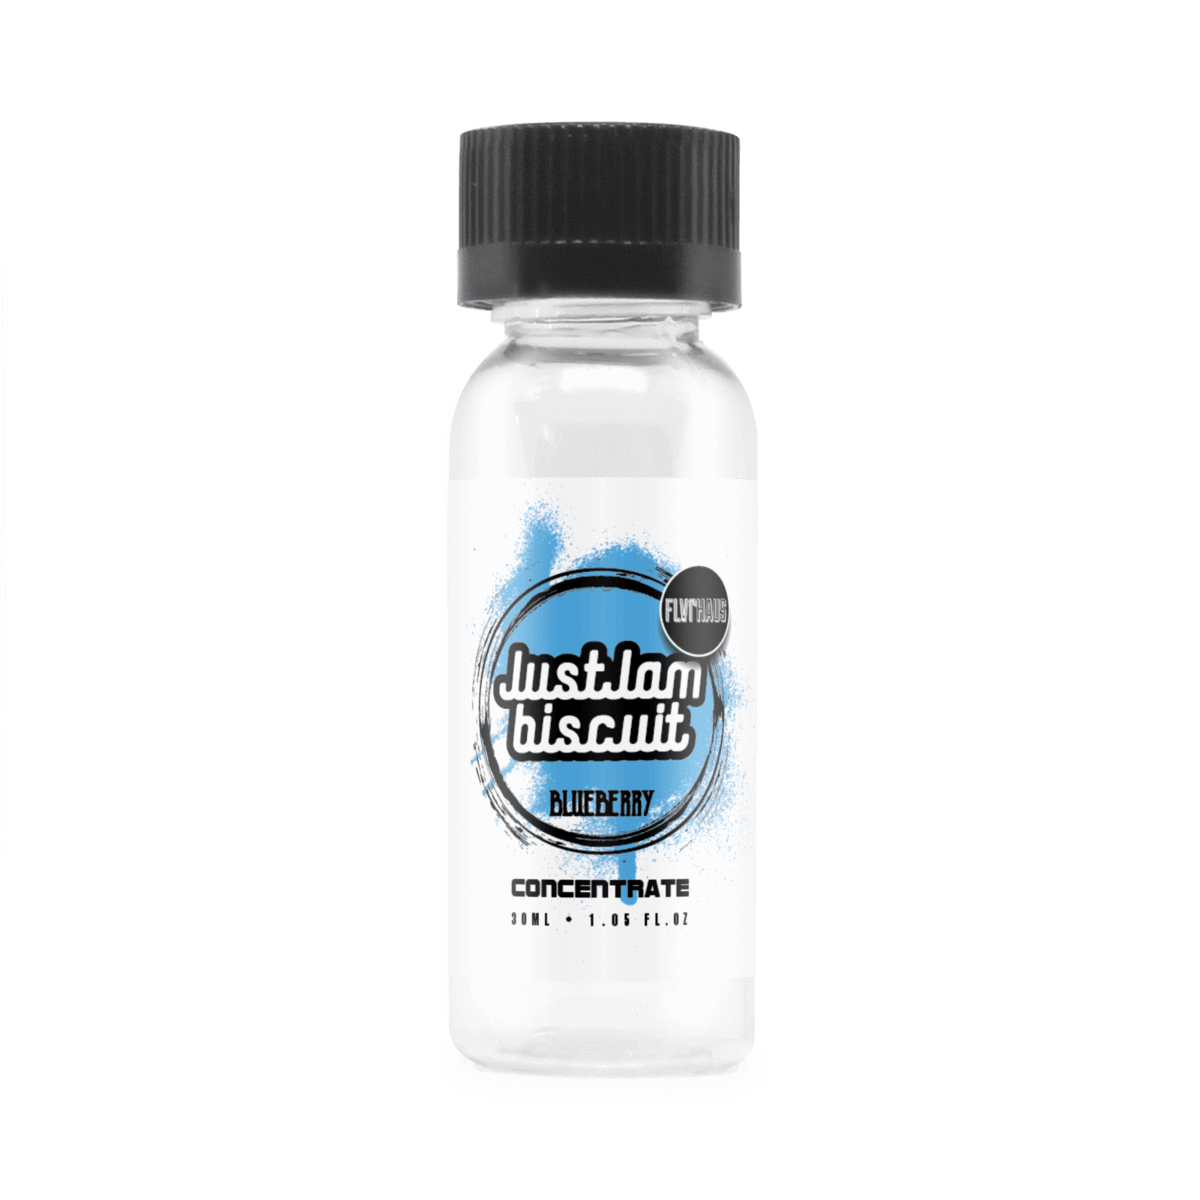 Blueberry Biscuit Concentrate E-liquid by Just Jam 30ml